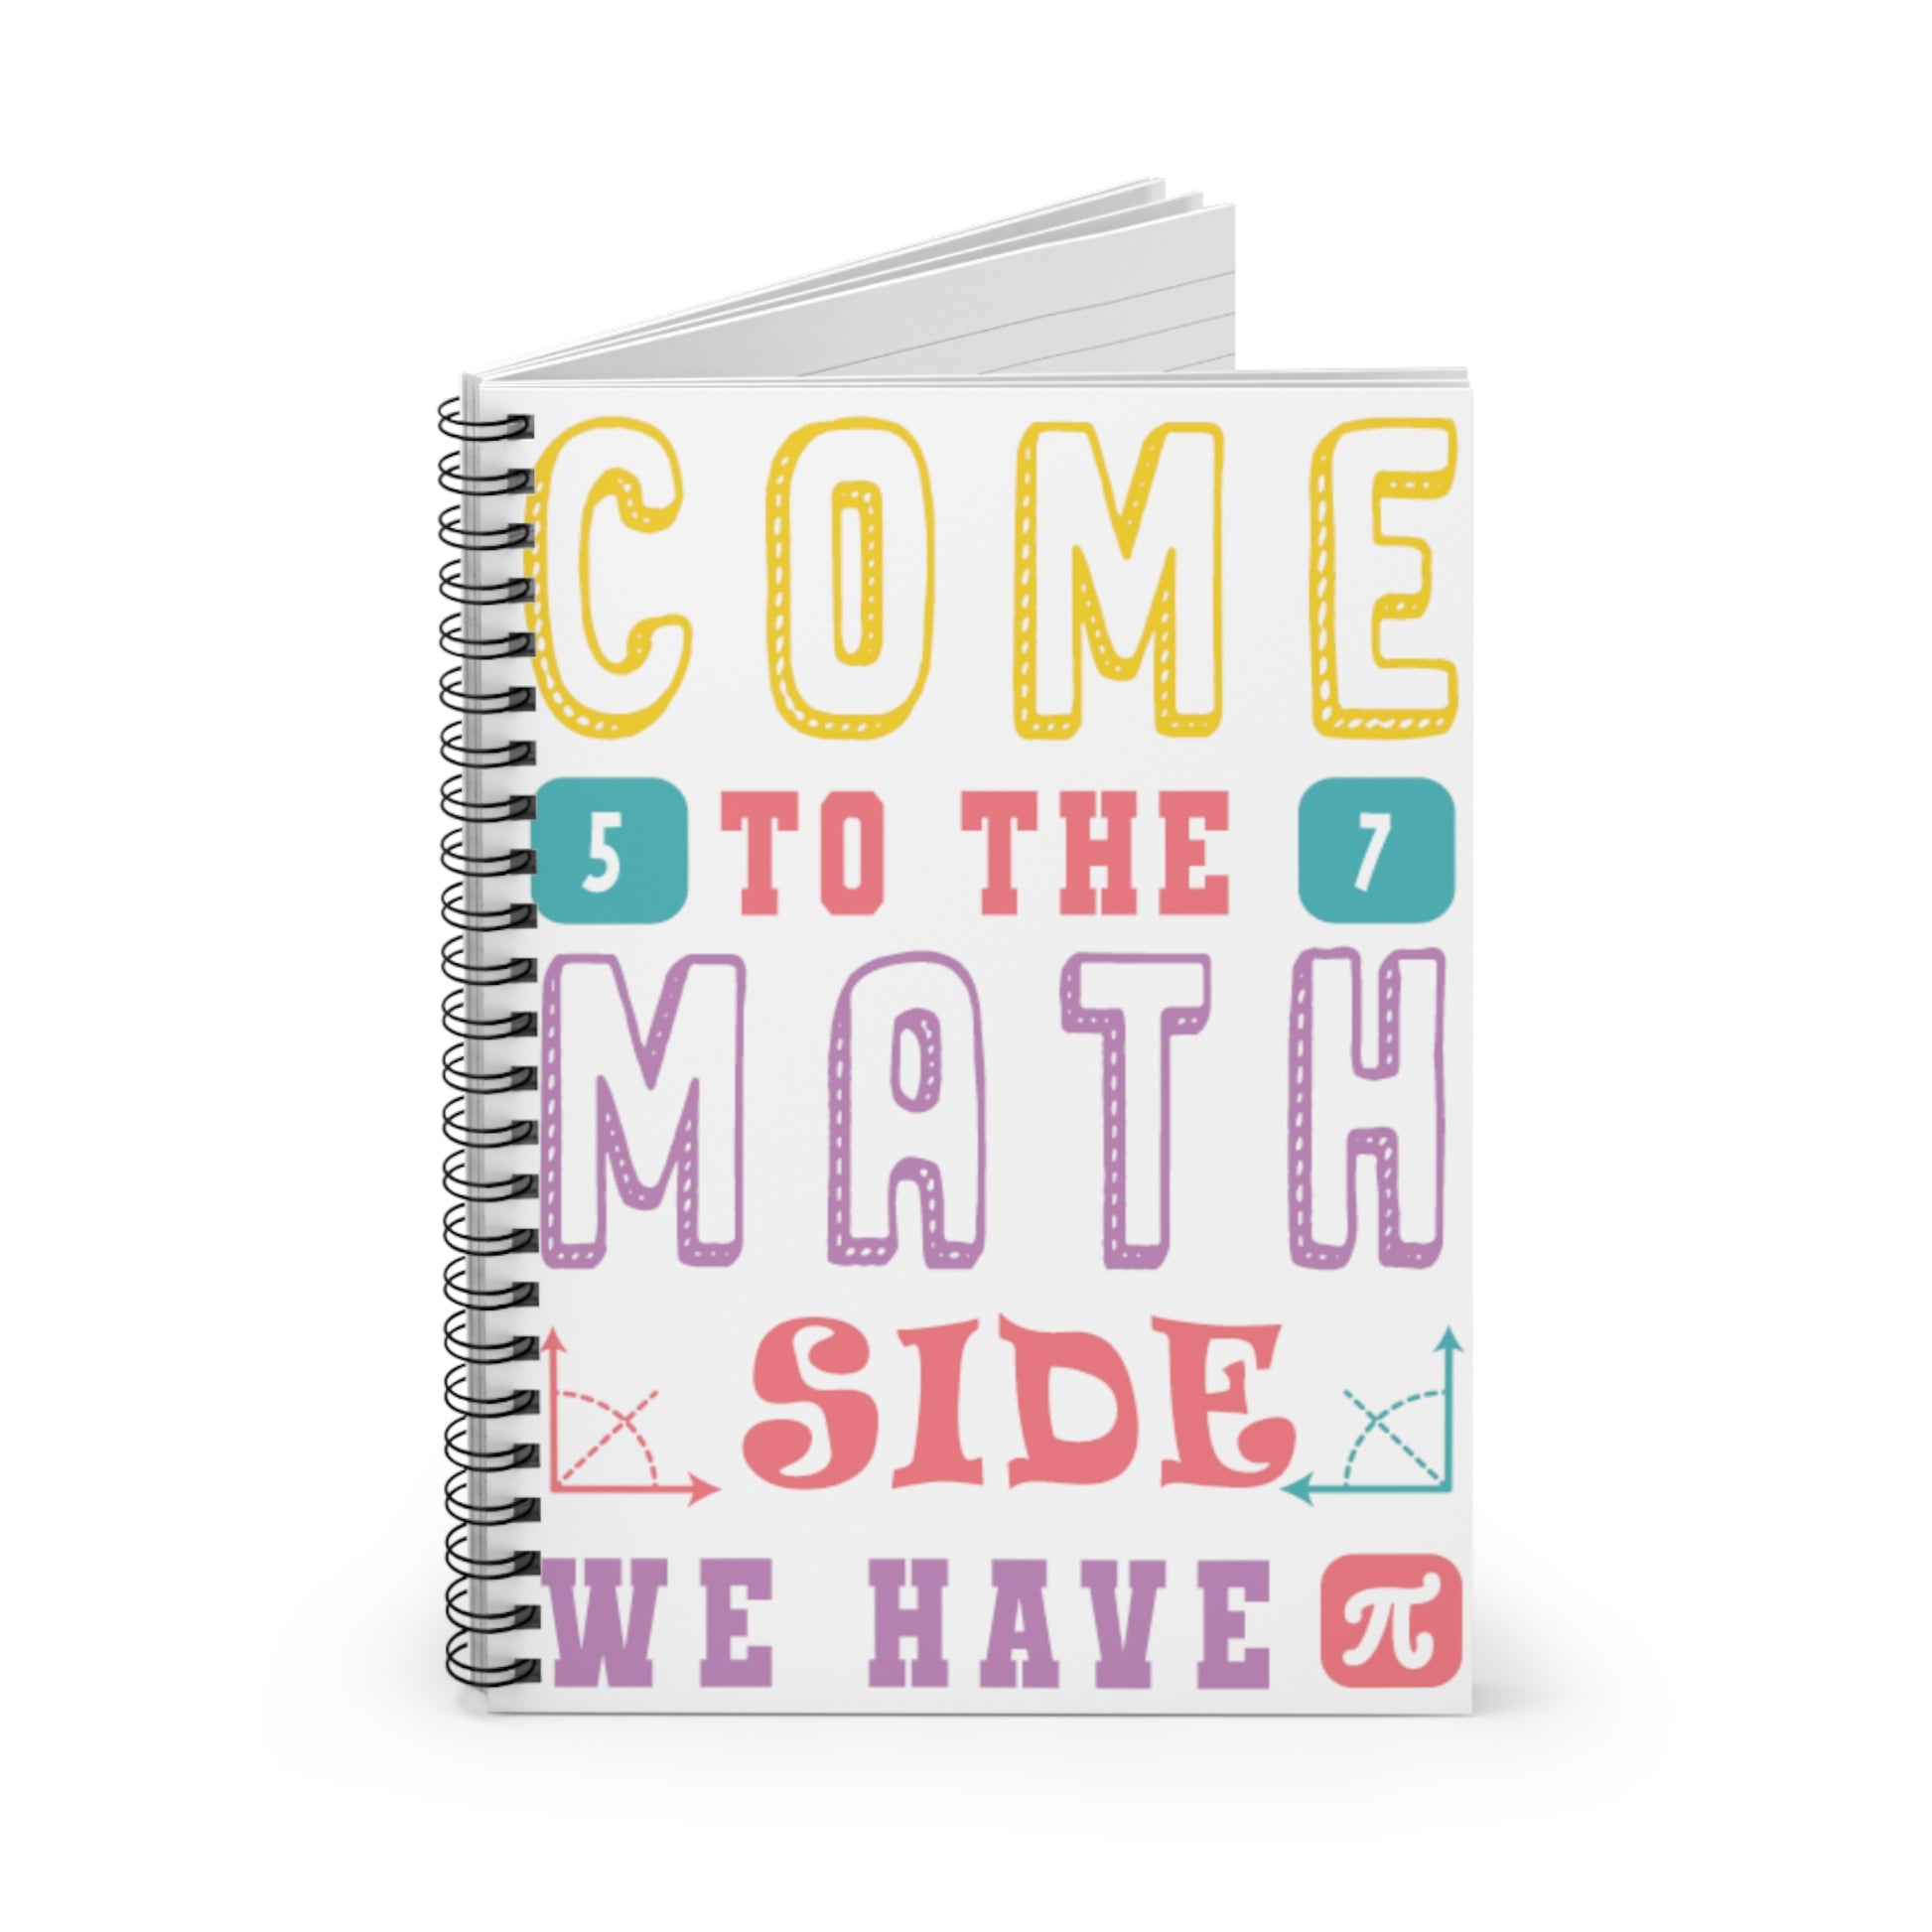 Come to the Math Side: Spiral Notebook - Log Books - Journals - Diaries - and More Custom Printed by TheGlassyLass